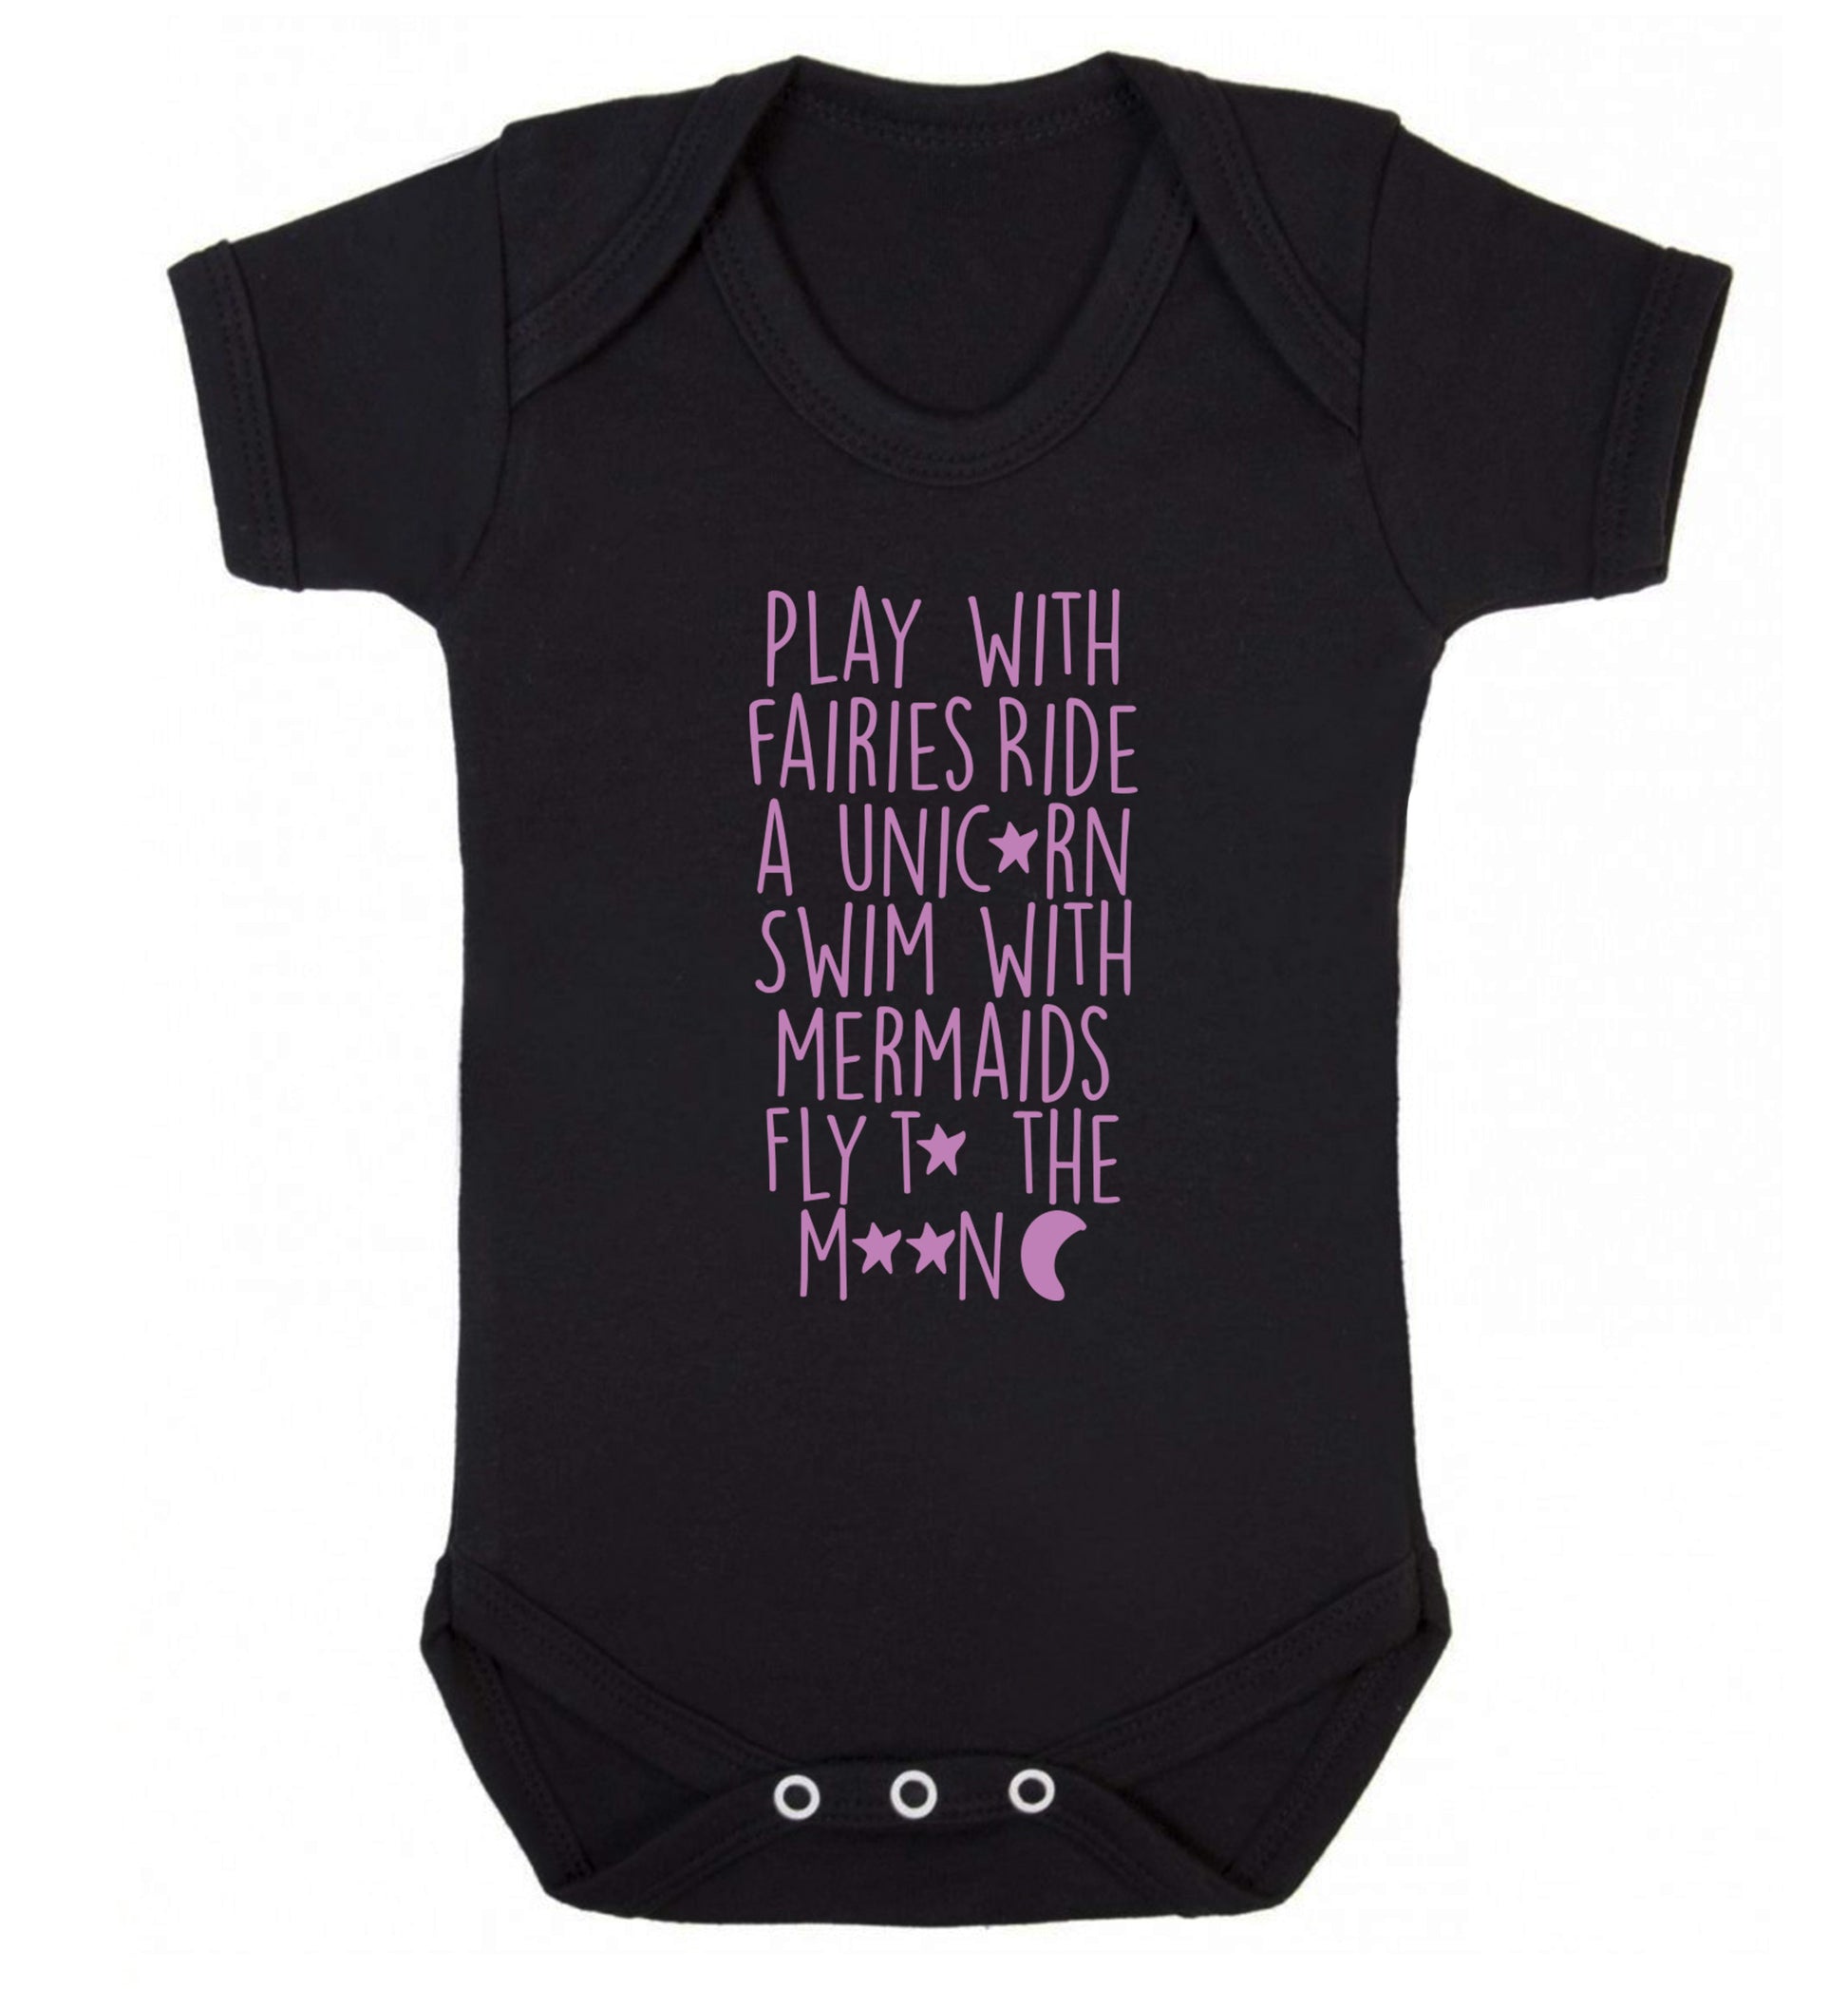 Play with fairies ride a unicorn swim with mermaids fly to the moon Baby Vest black 18-24 months